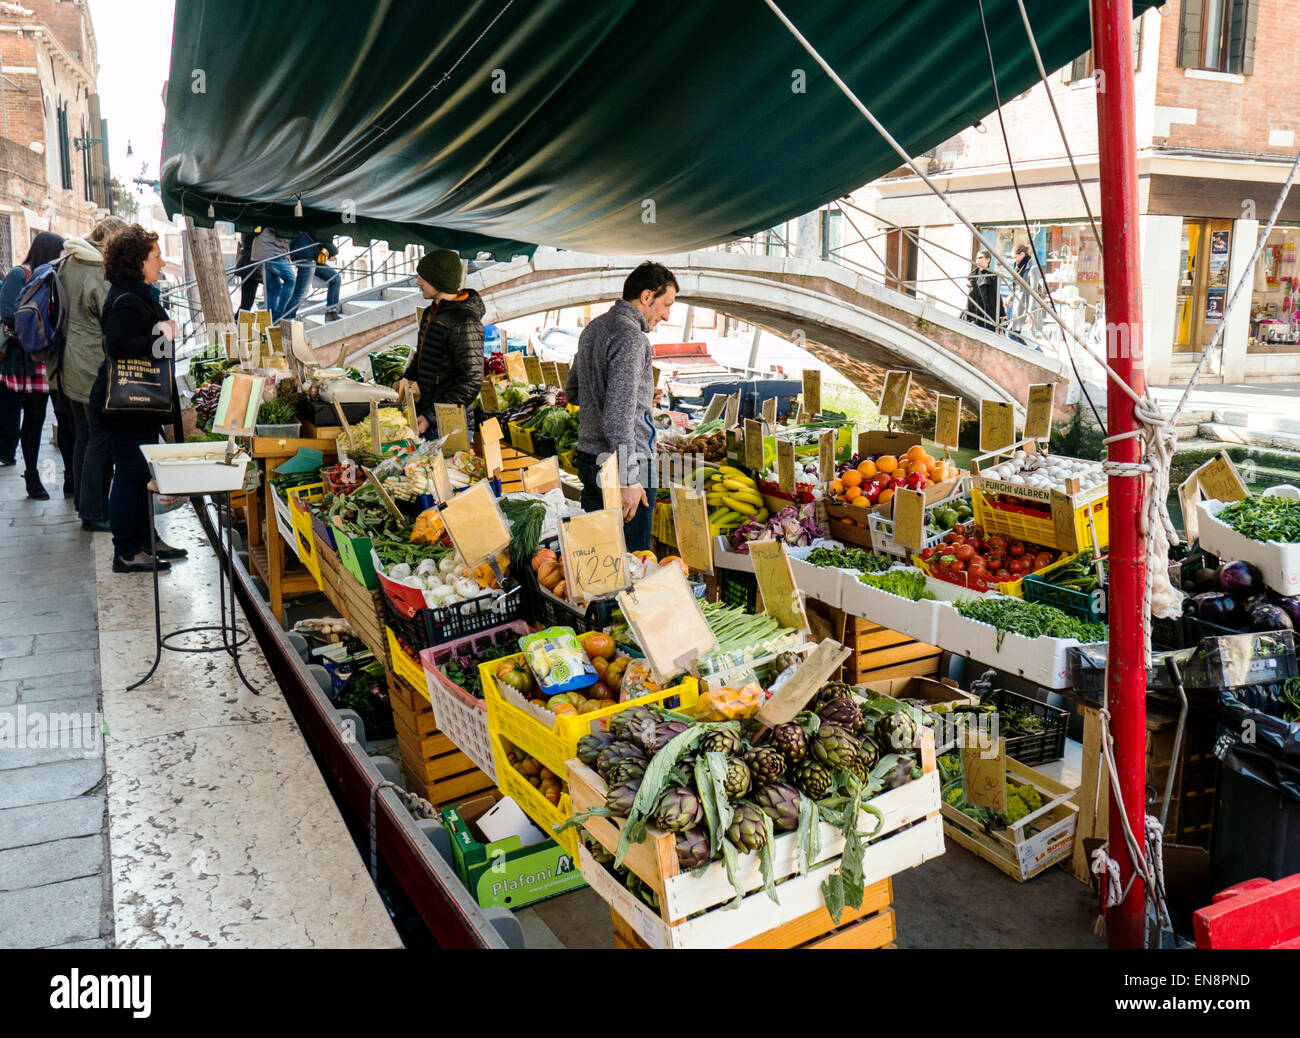 Vendor displays fresh fruit & vegetables on market boat, Venice, Italy, City of Canals Stock Photo